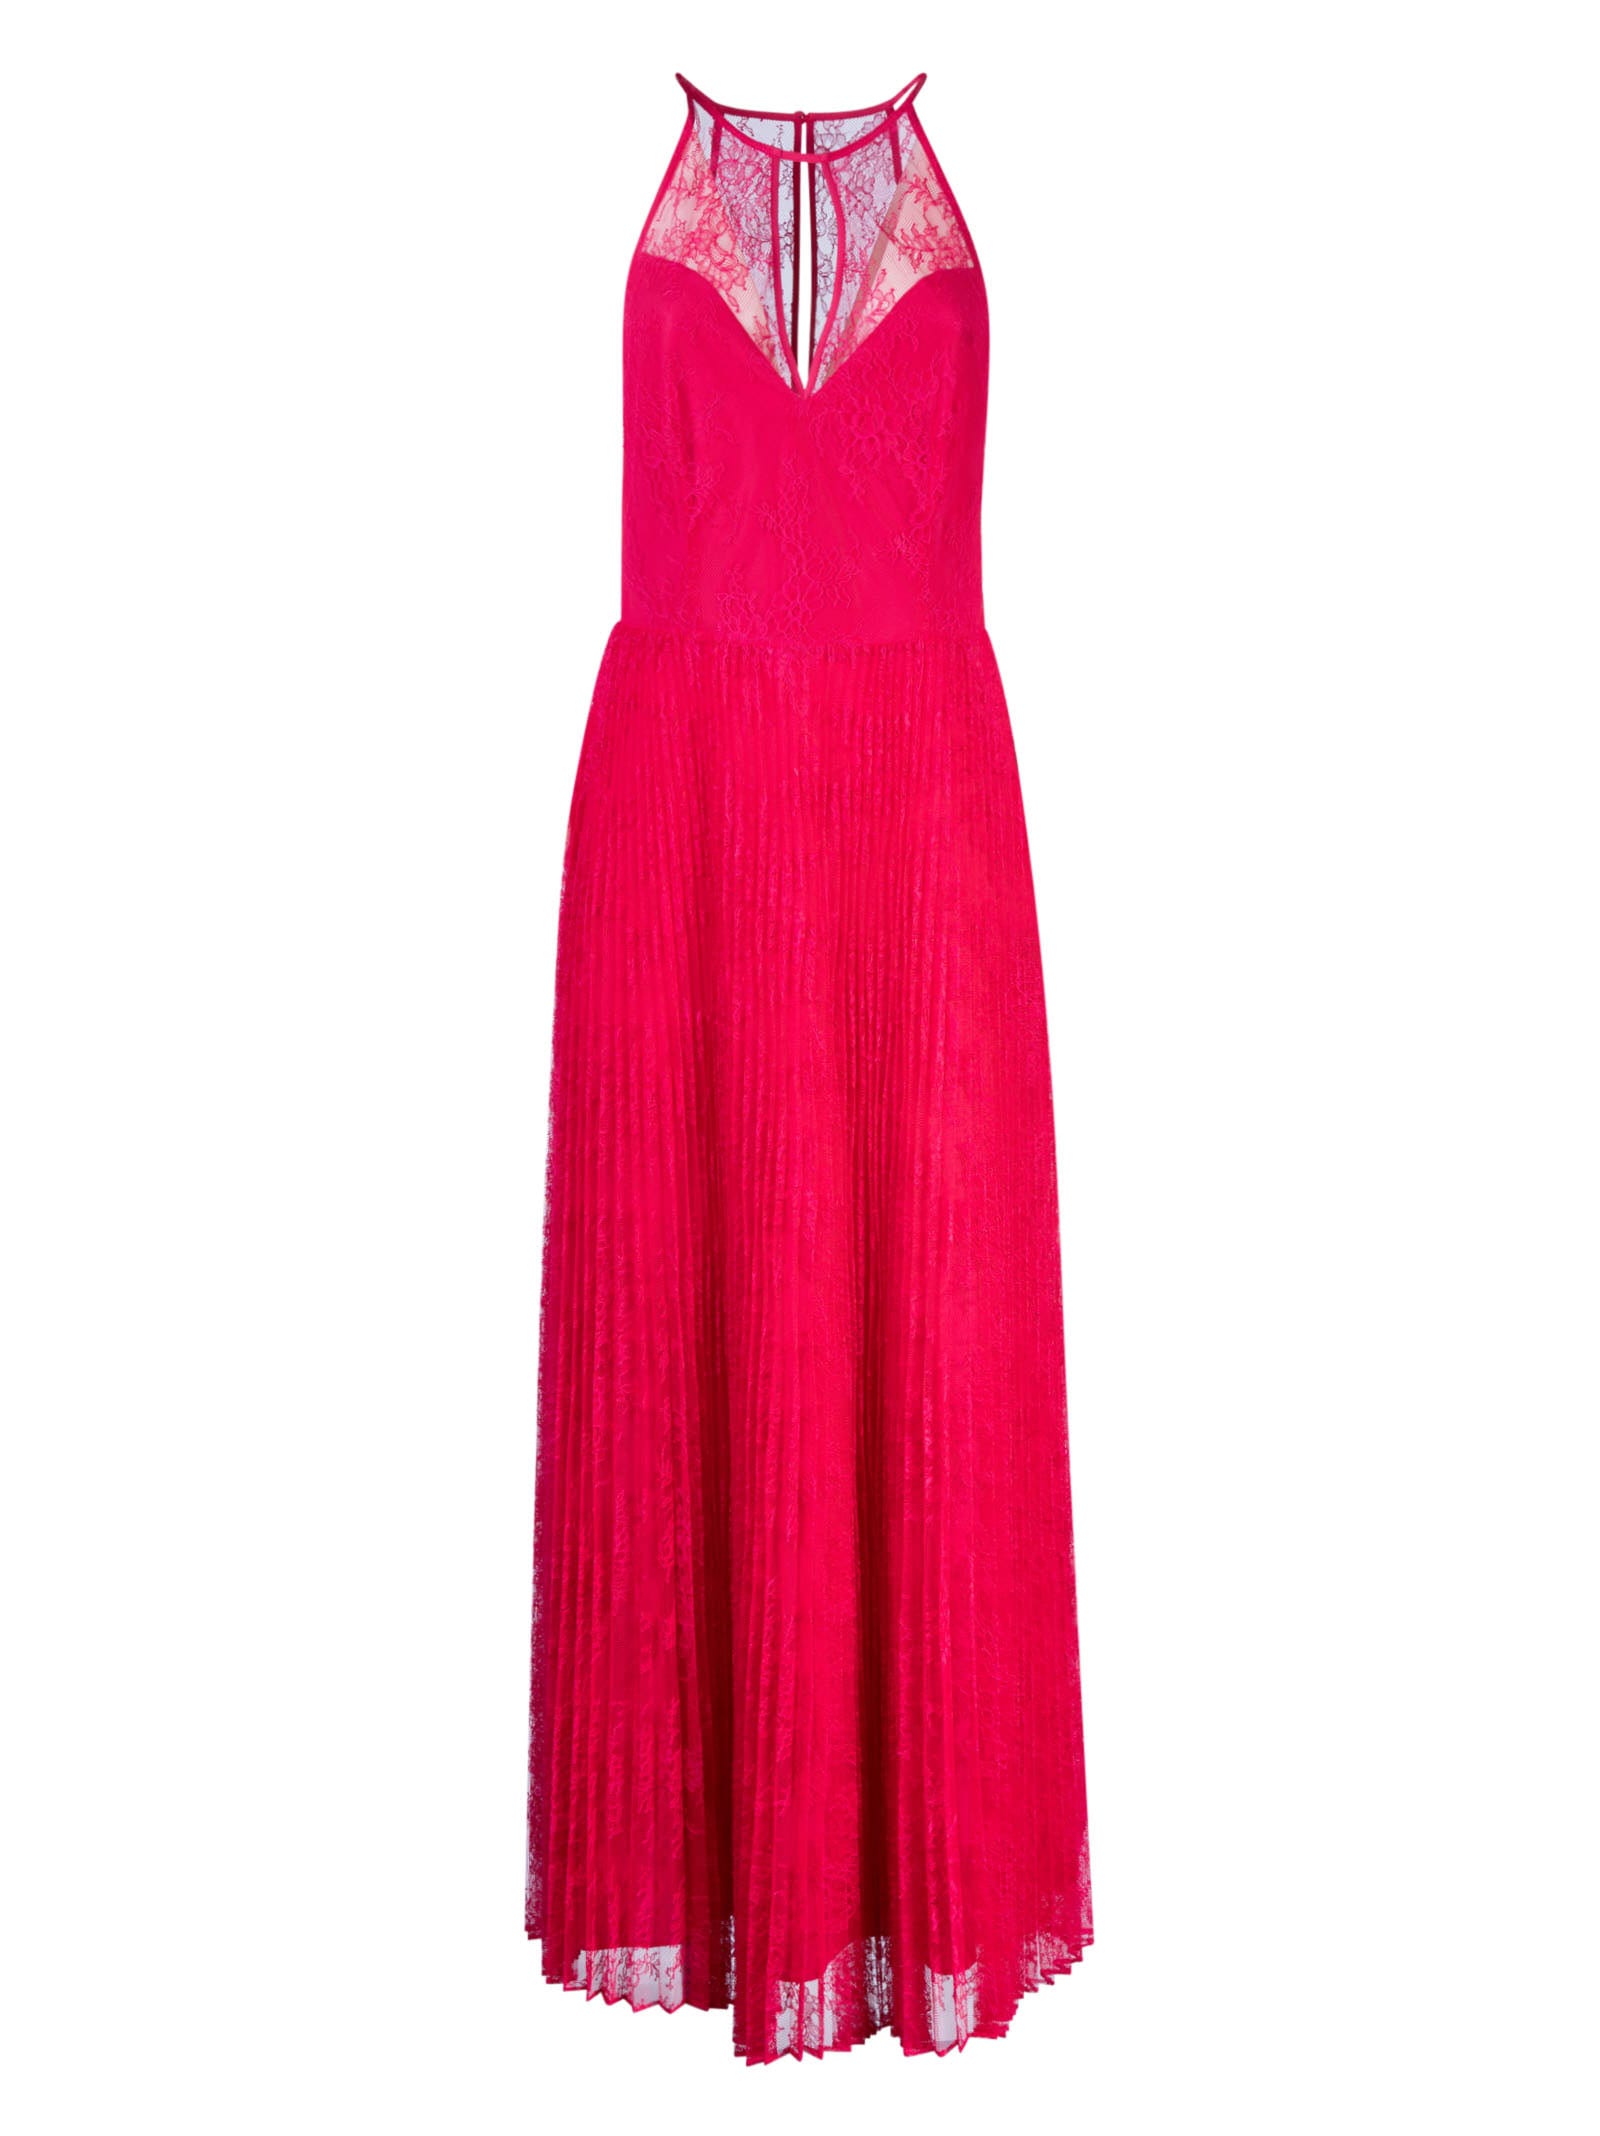 Twinset Sleeveless Long-length Dress In Bright Rose